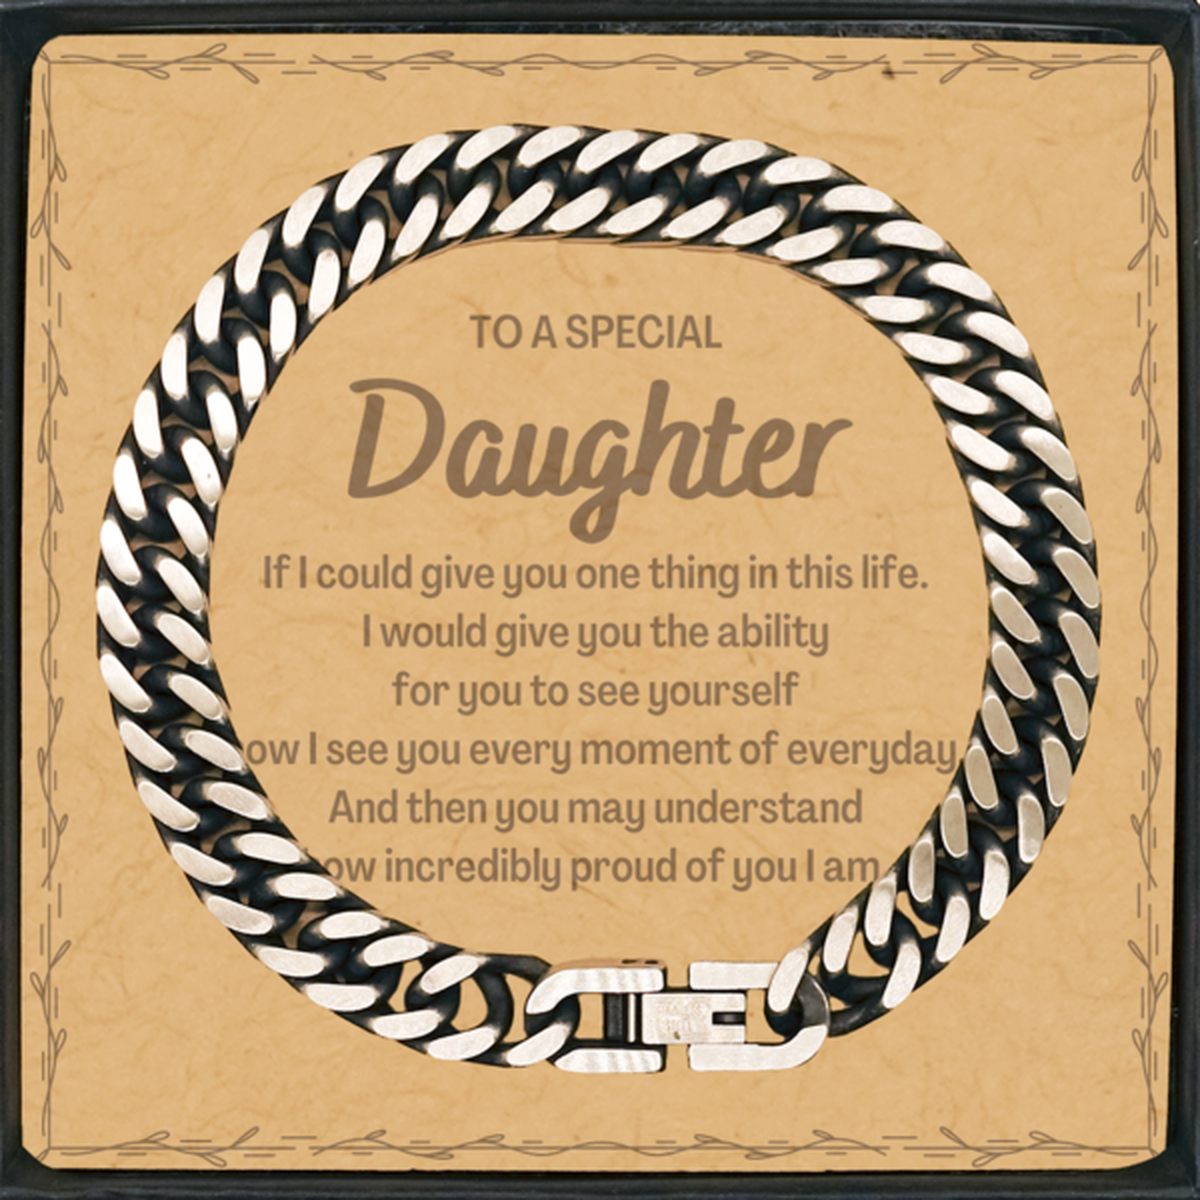 To My Daughter Cuban Link Chain Bracelet, Gifts For Daughter Message Card, Inspirational Gifts for Christmas Birthday, Epic Gifts for Daughter To A Special Daughter how incredibly proud of you I am